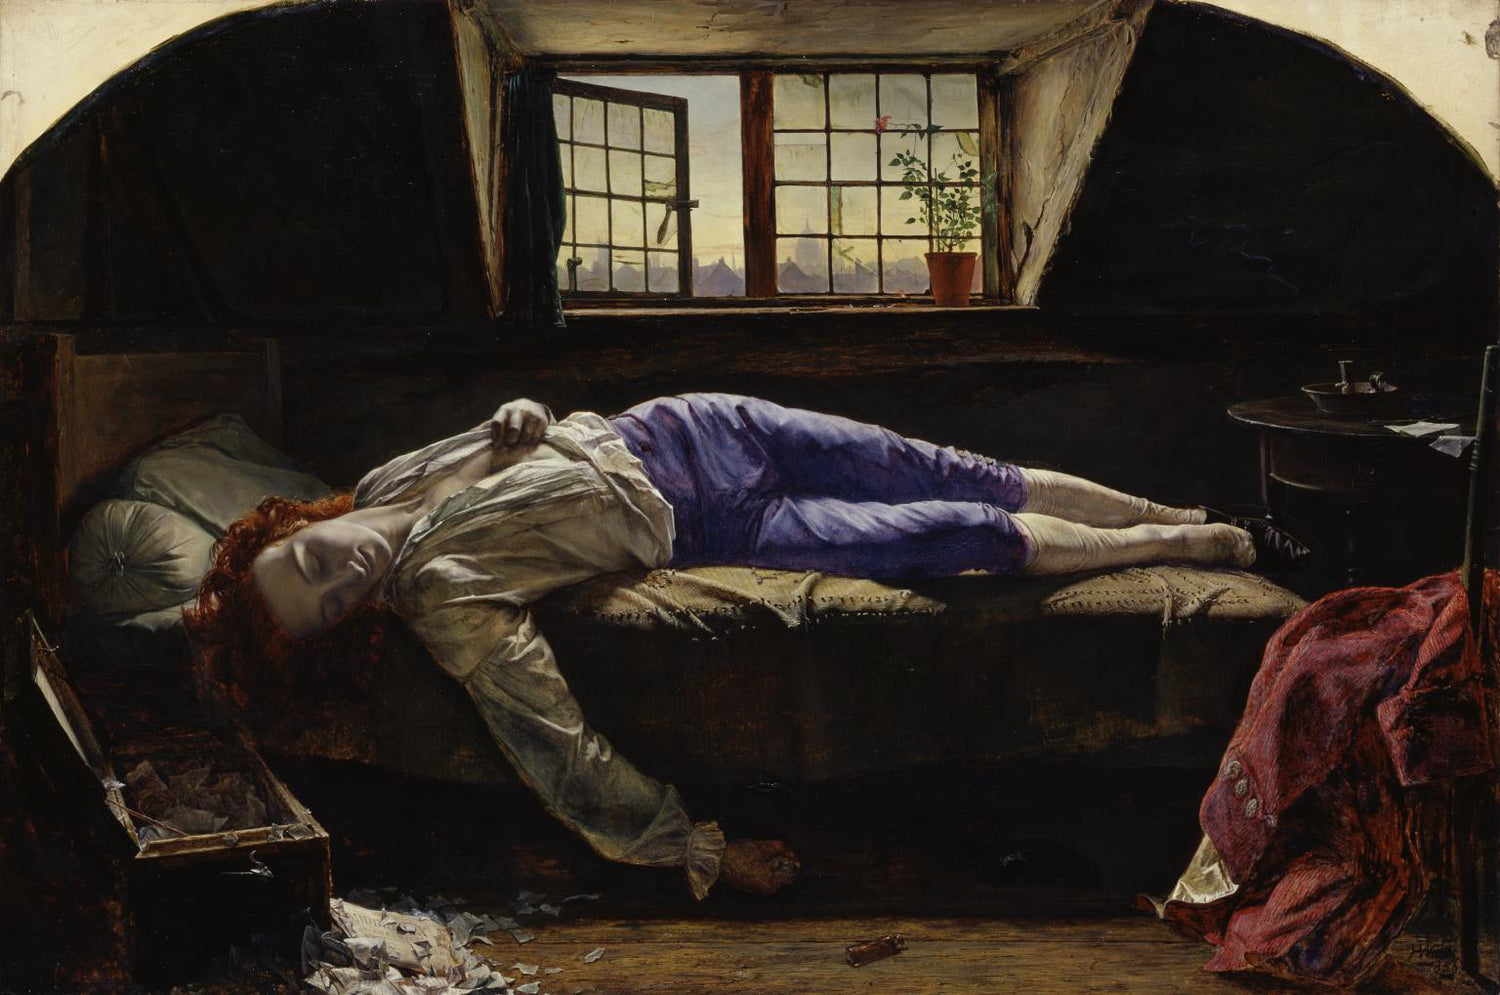 Furious, Wild and Young: The Death of Chatterton